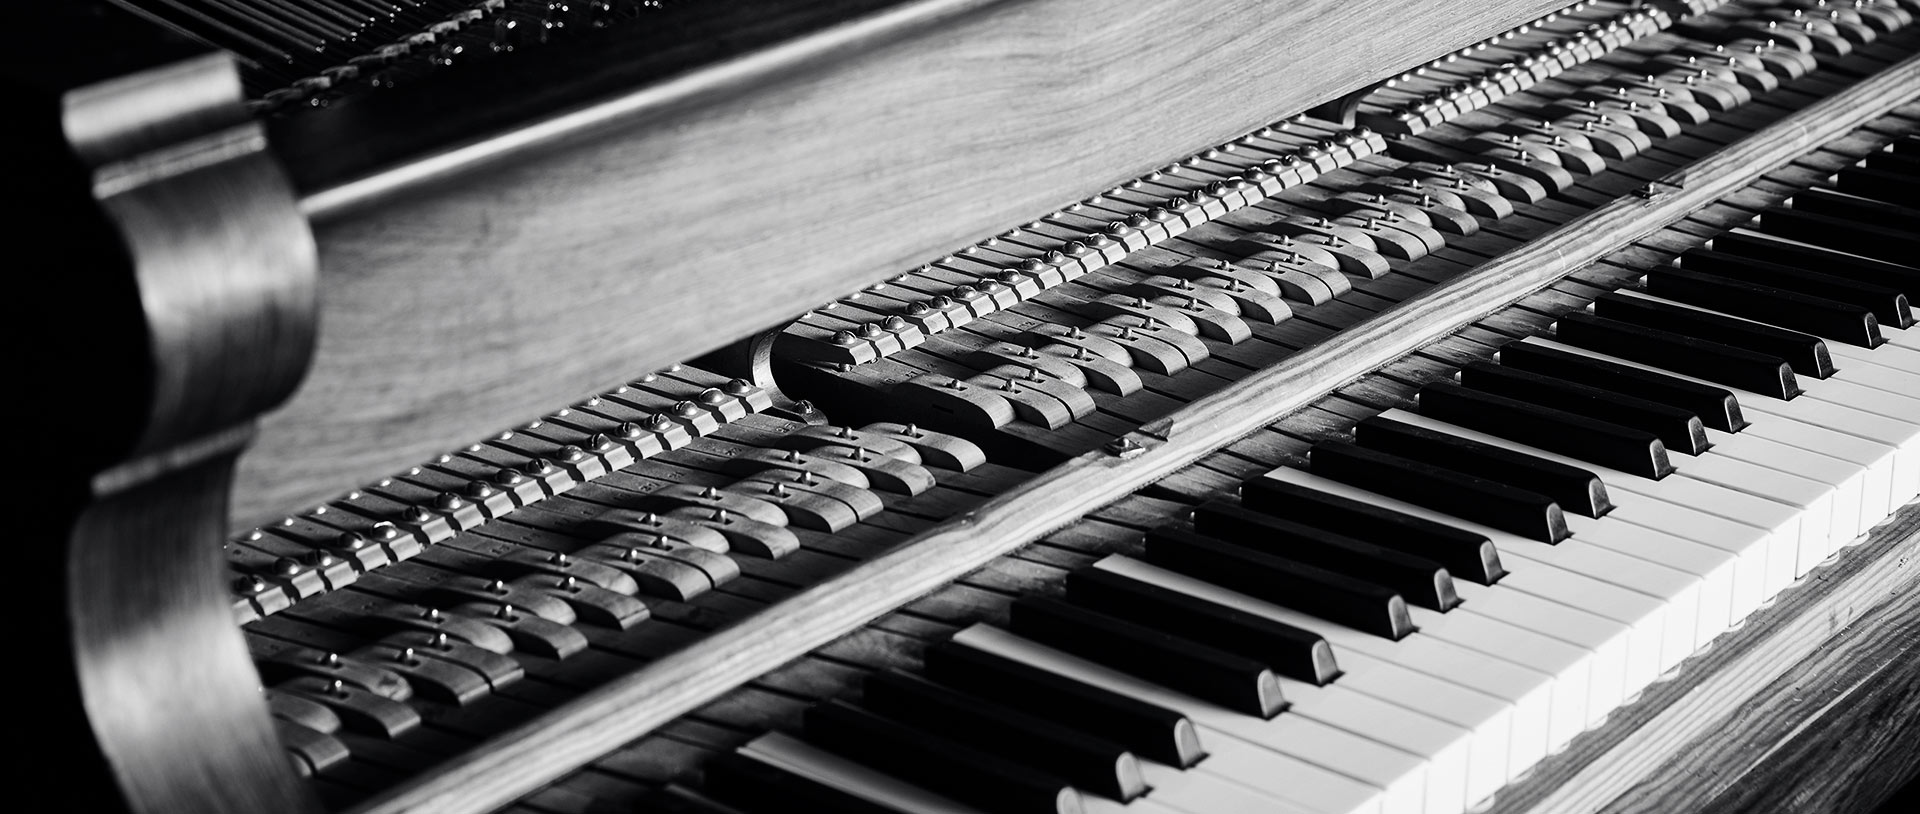 Detail Images Of Pianos Nomer 7